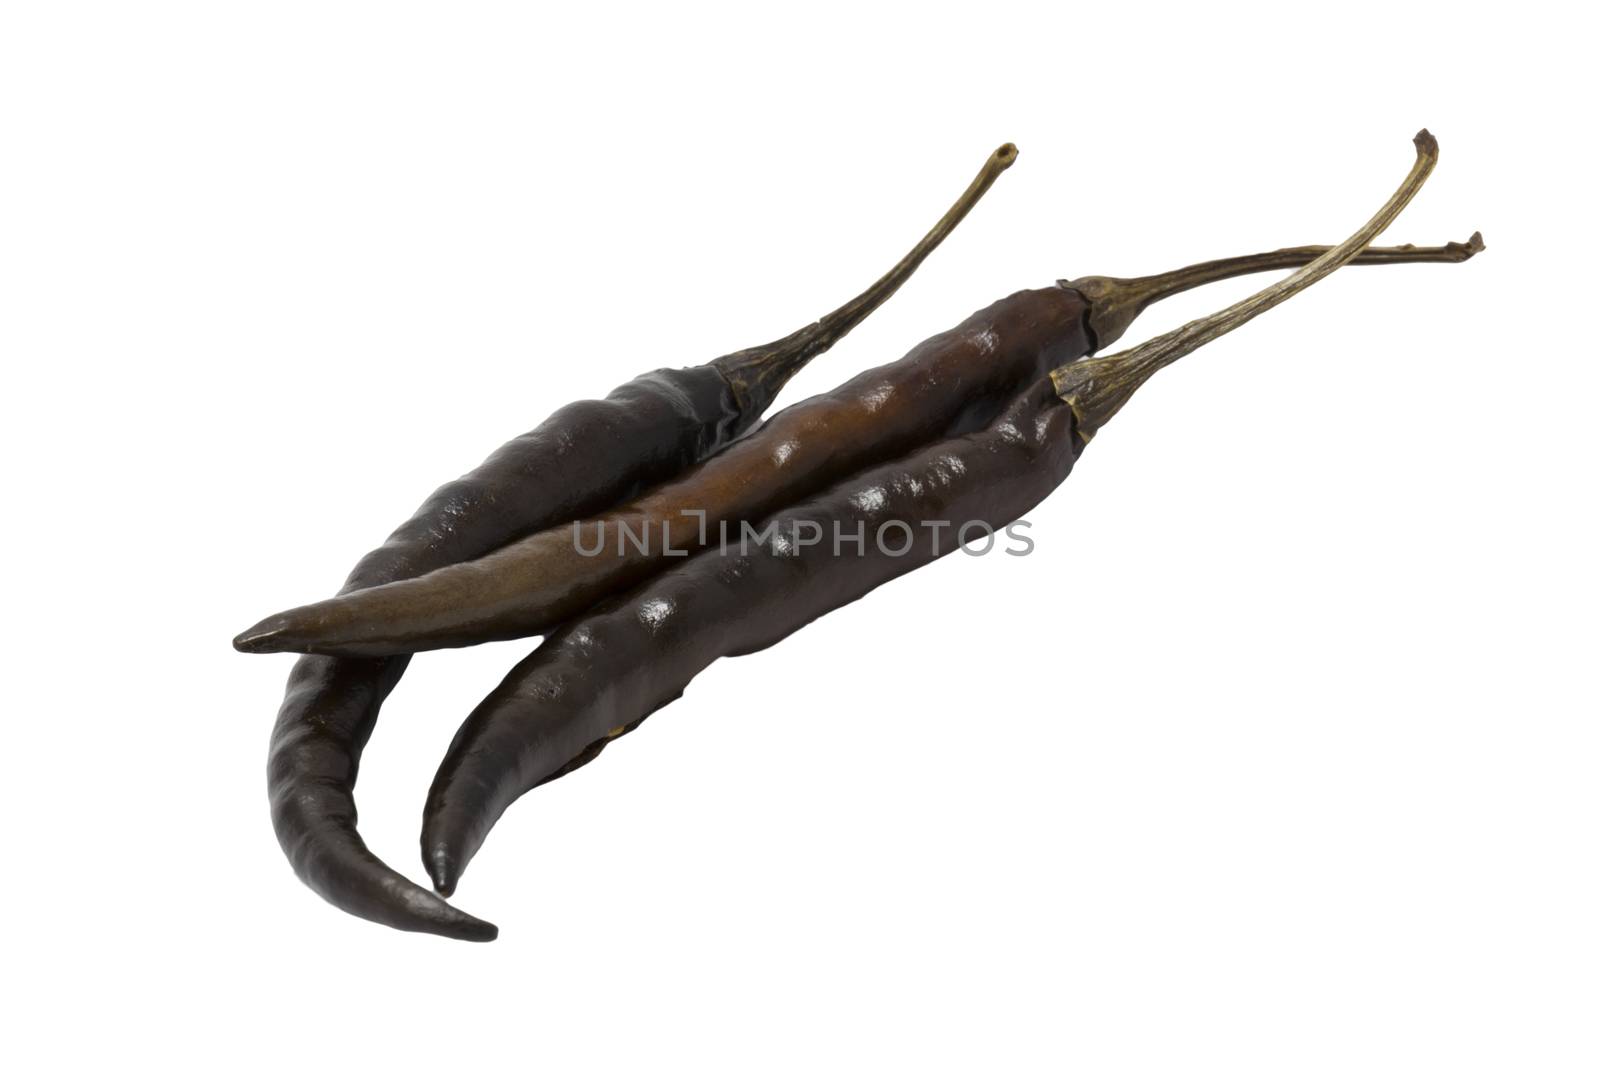 dried black chili peppers on white background